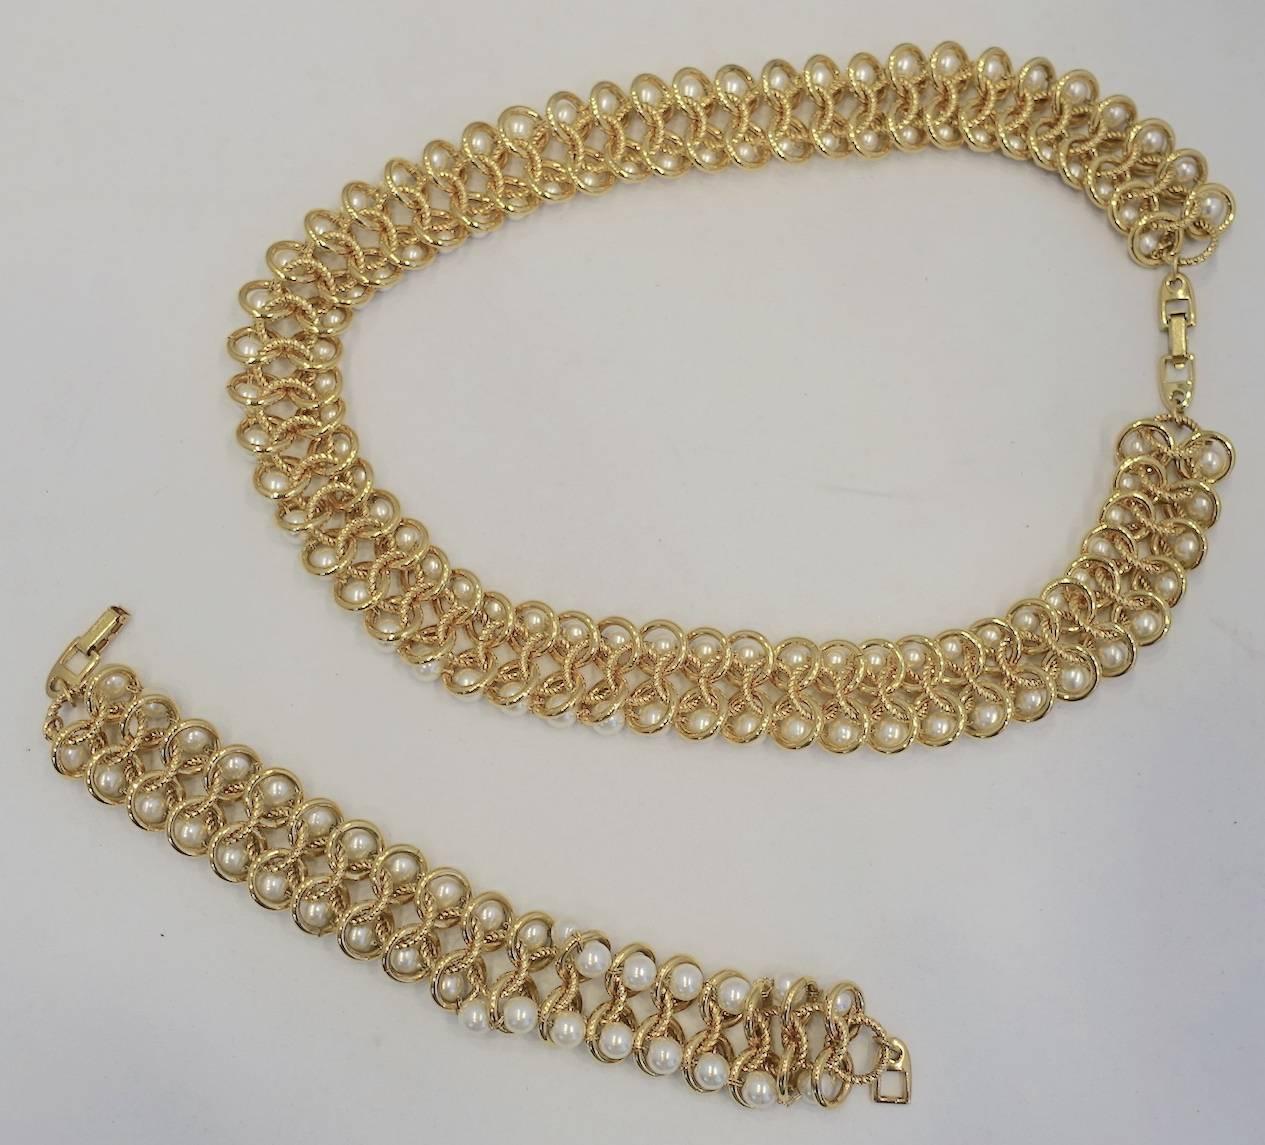 This vintage signed Napier set features faux pearls in a gold tone setting.  The necklace measures 18-3/4” x 7/8” with a fold-over clasp. The matching bracelet measures 7-3/4” x 1” with a fold-over clasp.  This set is signed “Napier” and in